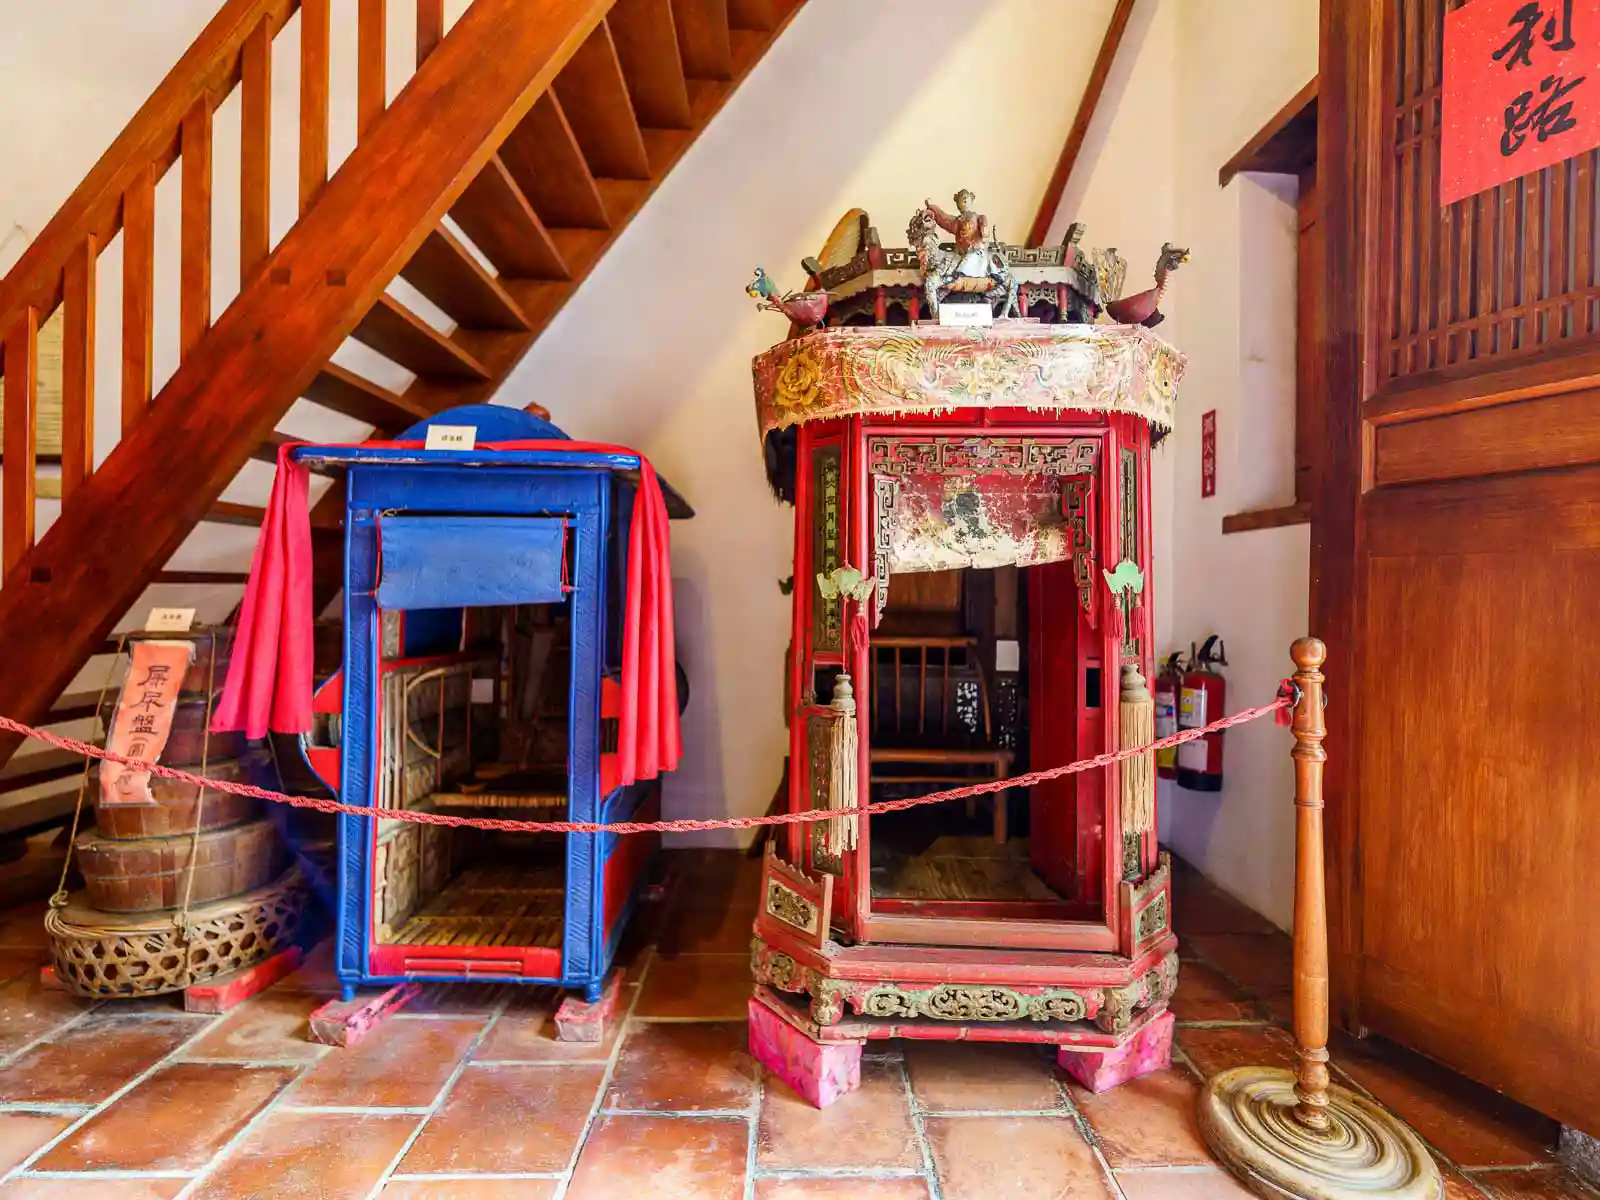 Two bridal sedan chairs are on display in Lukang Folk Arts Museum.